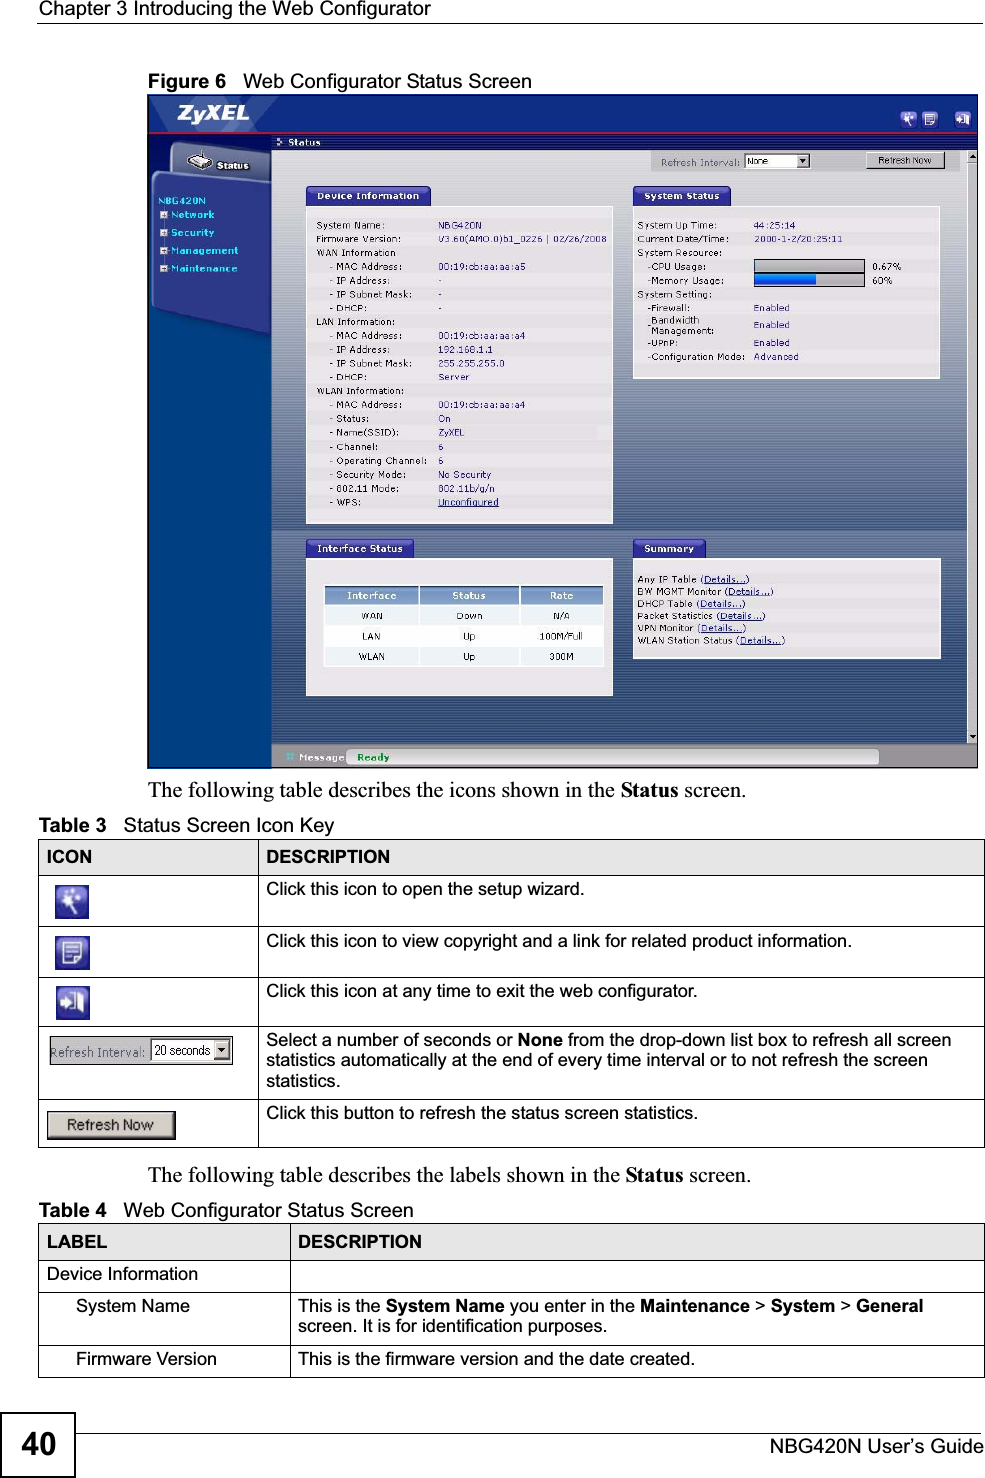 Chapter 3 Introducing the Web ConfiguratorNBG420N User’s Guide40Figure 6   Web Configurator Status Screen The following table describes the icons shown in the Status screen.The following table describes the labels shown in the Status screen.Table 3   Status Screen Icon Key ICON DESCRIPTIONClick this icon to open the setup wizard. Click this icon to view copyright and a link for related product information.Click this icon at any time to exit the web configurator.Select a number of seconds or None from the drop-down list box to refresh all screen statistics automatically at the end of every time interval or to not refresh the screen statistics.Click this button to refresh the status screen statistics.Table 4   Web Configurator Status Screen   LABEL DESCRIPTIONDevice InformationSystem Name This is the System Name you enter in the Maintenance &gt; System &gt; Generalscreen. It is for identification purposes.Firmware Version This is the firmware version and the date created. 